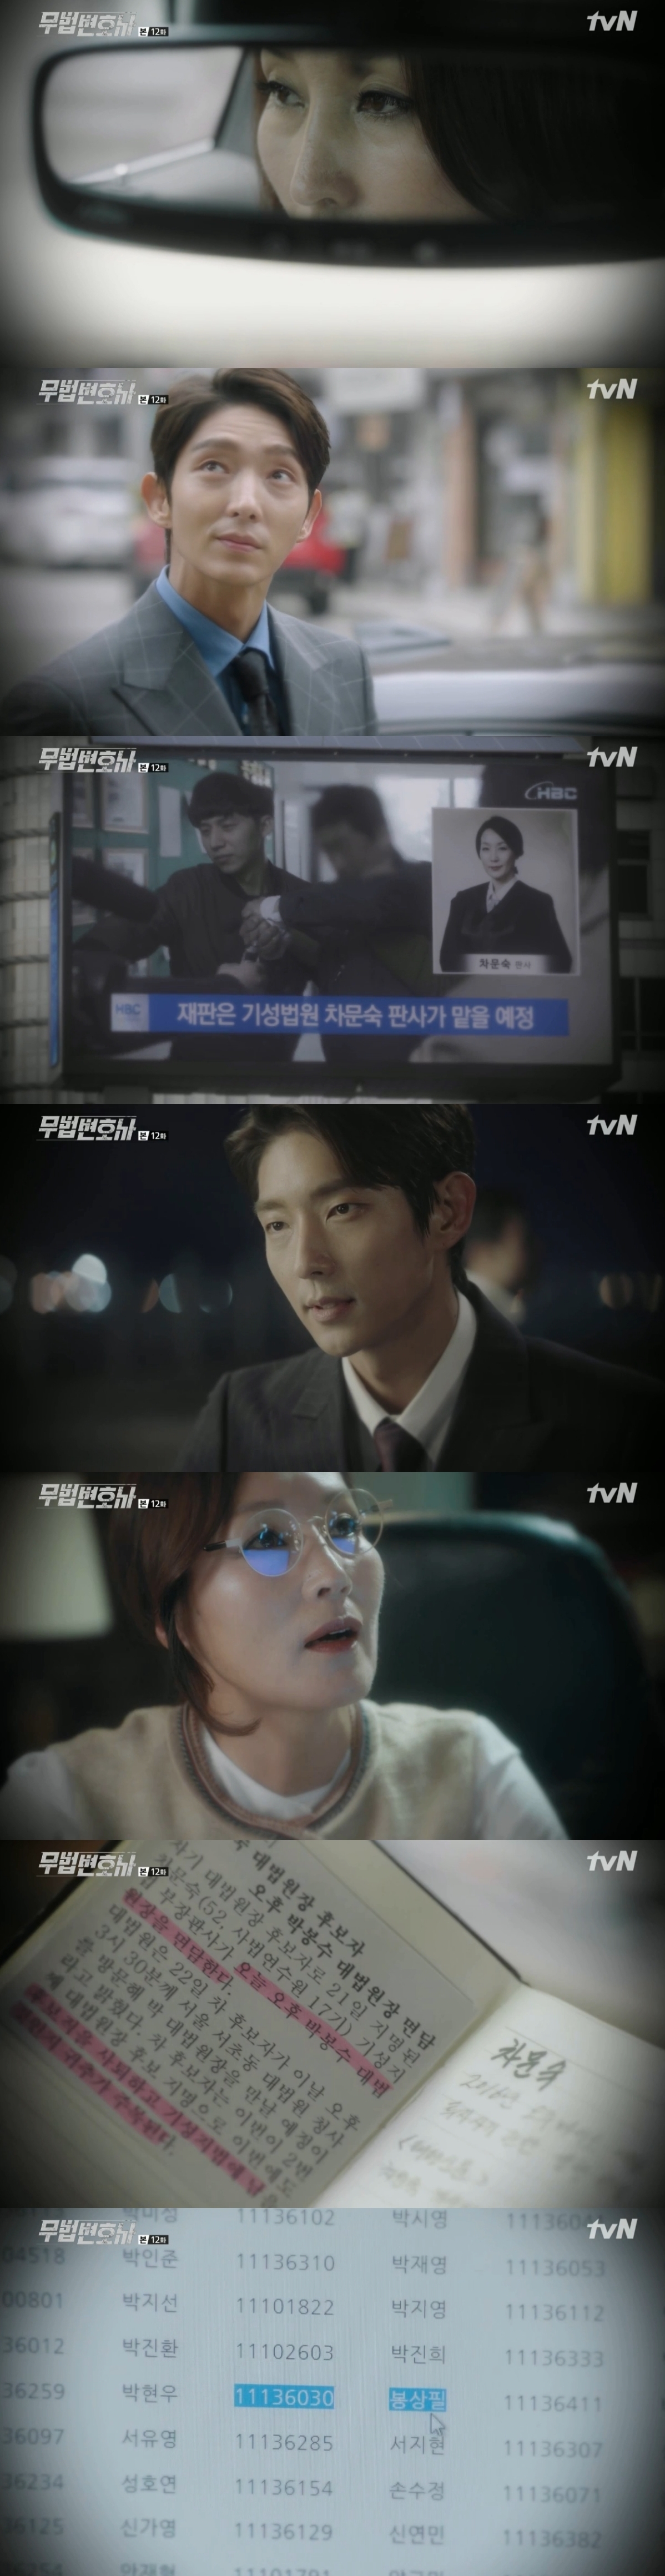 On TVN Lawless Lawyer, which was broadcasted at 9 pm on the 17th, Bong Sang-pil (Lee Joon-gi), who went directly to catch the real killer who killed his uncle, was drawn.On that day, Bong kidnapped Seokyu-dong (Choi Dae-hoon), who killed his uncle, and tortured him to hear the confession; Seokyu-dong shouted, I stabbed him, but I didnt stab him.Bong Sang-pil warned, I will do the same thing to my uncle. After all, Seokgu-dong said that he left evidence that he had ordered Anoju.On the Seokgu-dong mobile phone, the video showing An Oh-ju, who instructed him to kill Choi Dae-ung, was confirmed.Bong Sang-pil planned to release the video and recording files on the Internet before sending them to the prosecutor. The news was broadcast in the morning and Ha Jae-yi asked Bong Sang-pil, Why did you not tell me anything?Ha Jae-yi noticed that he was his mother during a meal with Noh Hyun-joo, who called him and said, No one knows Im allergic to shrimp, except my mother.After that, Roh Hyun-joo returned to Judge Cha Moon-sook and took out the powder of question from the bag.But the powder was off in the teacup and Cha Moon-sook, who found it, said, I dont think about tea. He mentioned that he knew the identity of Shin Yi Noh Hyun-joo.Angered, Noh Hyun-joo tried to kill Cha Moon-sook but failed.Ha Jae-yi, who visited his house to meet Noh Hyun-joo, met Bong Sang-pil there, and he was angry, How can you do that to me? Can you hide it?Ha Jae-yi was worried that the phone was turned off early, something must have happened to my mother. Eventually, he went to Judge Cha Moon-sook and asked her whereabouts.When her mothers whereabouts became unknown, Ha Jae-yi expressed disappointment to Bong Sang-pil, saying, I thought only revenge. I can not believe it now.Bong Sang-pil noticed that the person who sent his notebook to him was Cha Moon-sook, who was convinced that Cha Moon-sook brought me to the fore.Cha Moon-sook tried to get rid of all his teeth by Lee Yong-pil. Bong Sang-pil said, I needed my revenge to remove An-oh.Cha Moon-sook is a woman who has known the desire of people better than anyone else and has been Lee Yong. He said, I chose me even though I knew that the end of my knife was my own. 